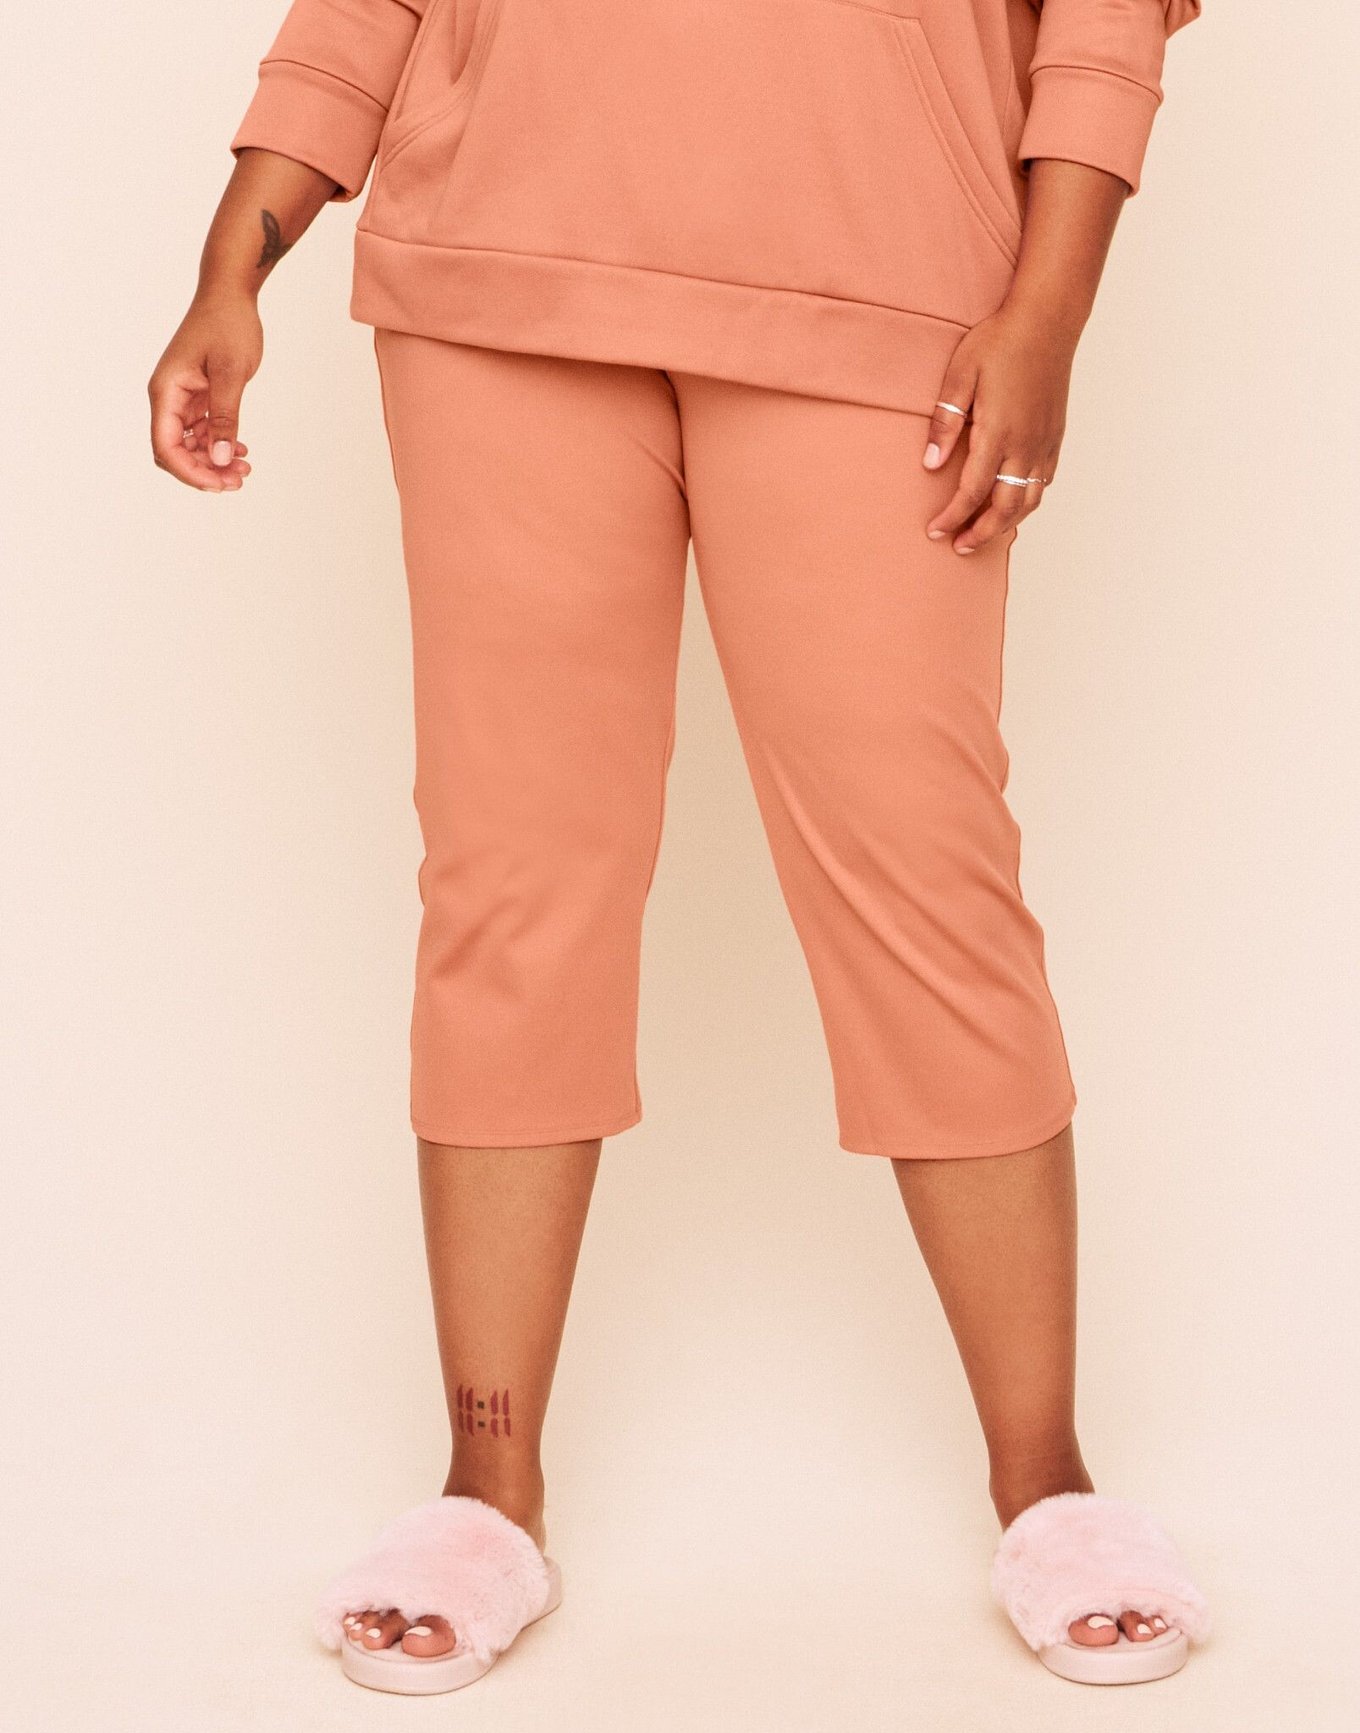 Jaelyn Cropped Pant Placement Pink Plus Cropped pant length, 1X-3X